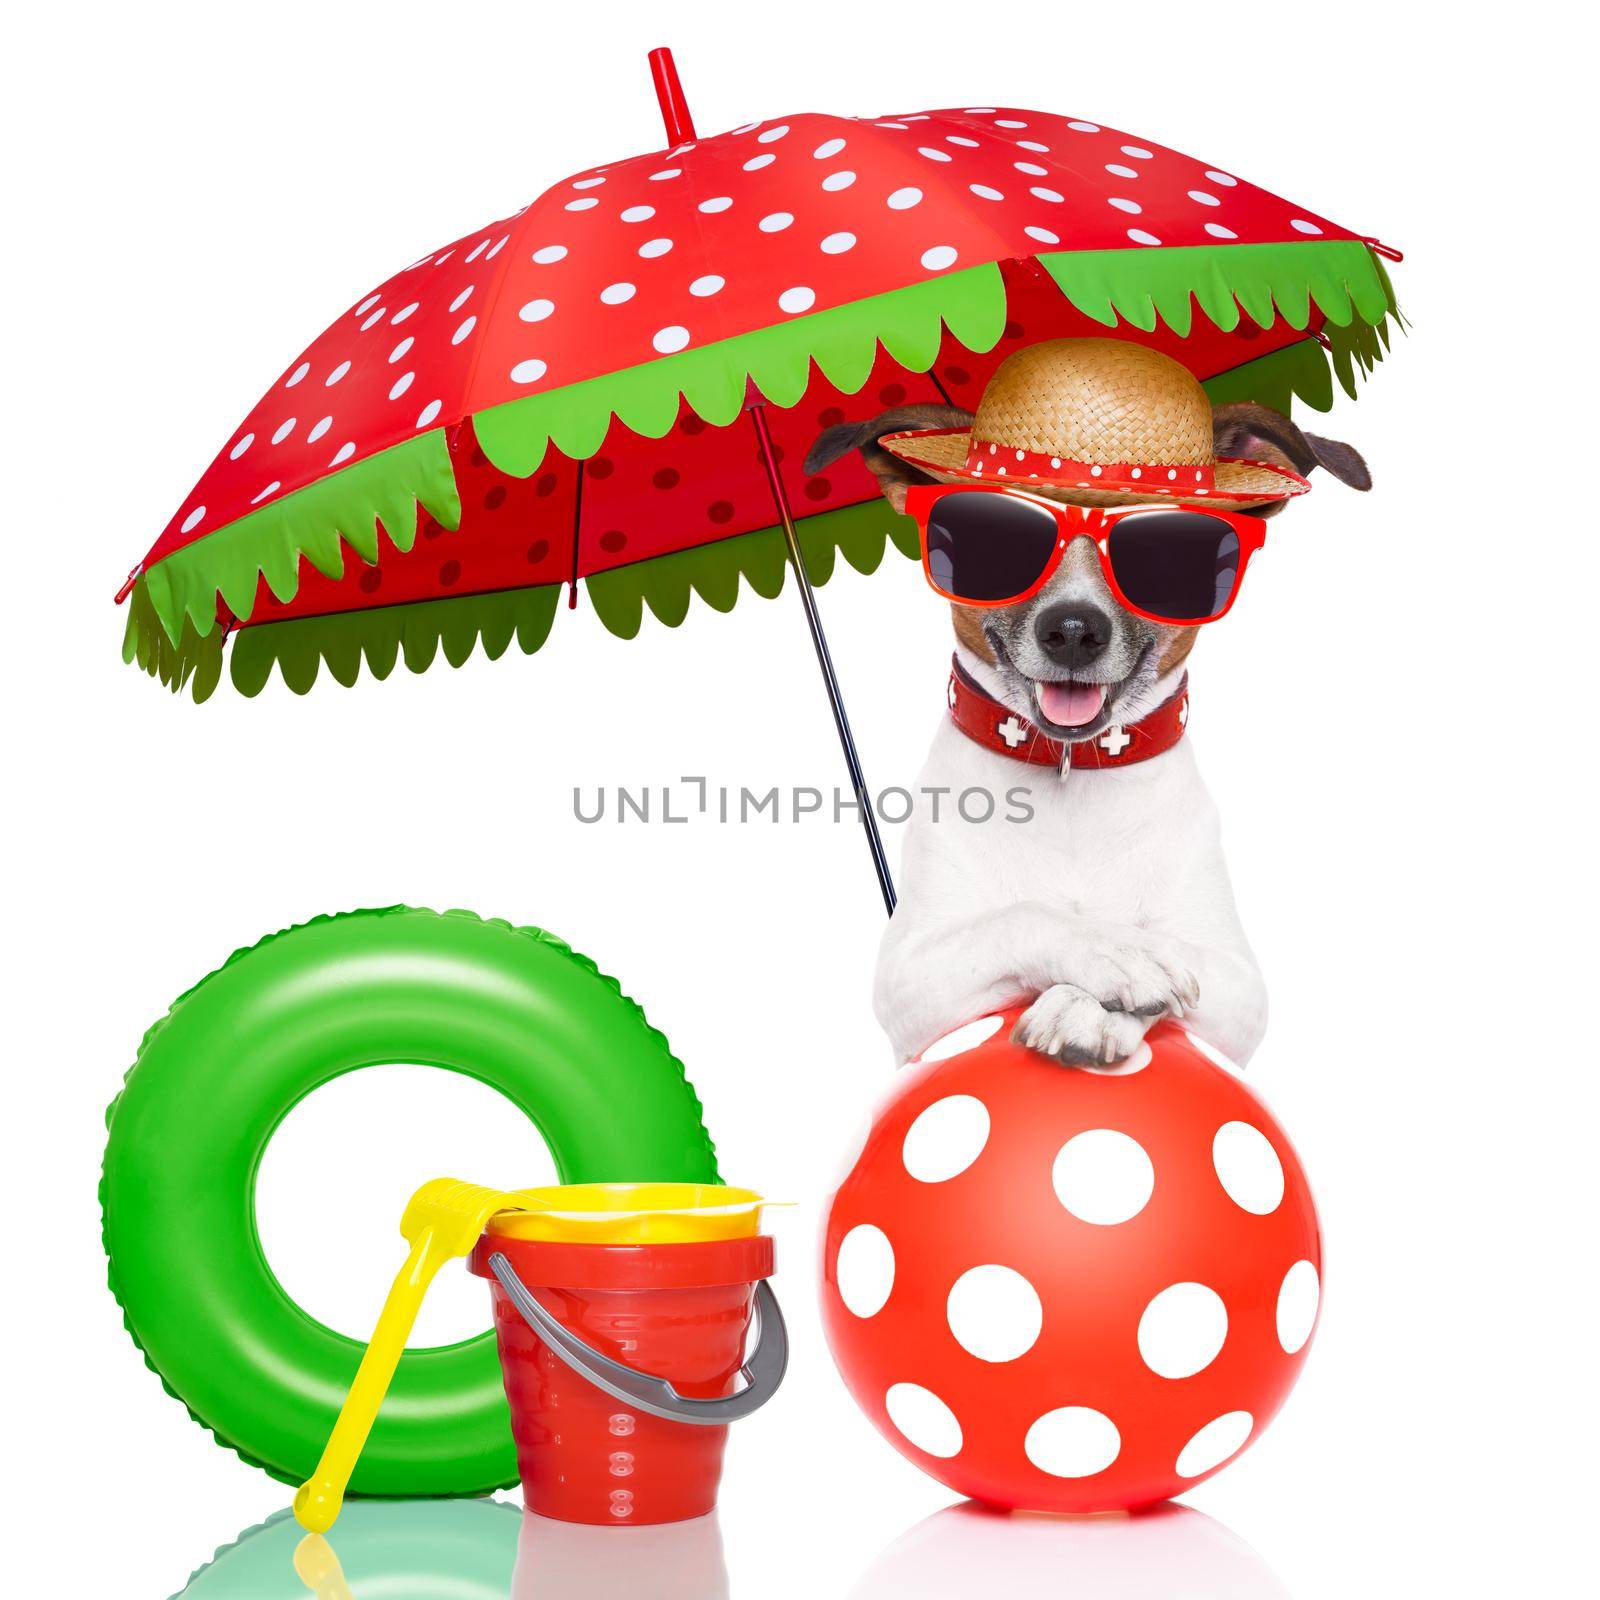 dog under umbrella with red sunglasses and a nice colorful hat